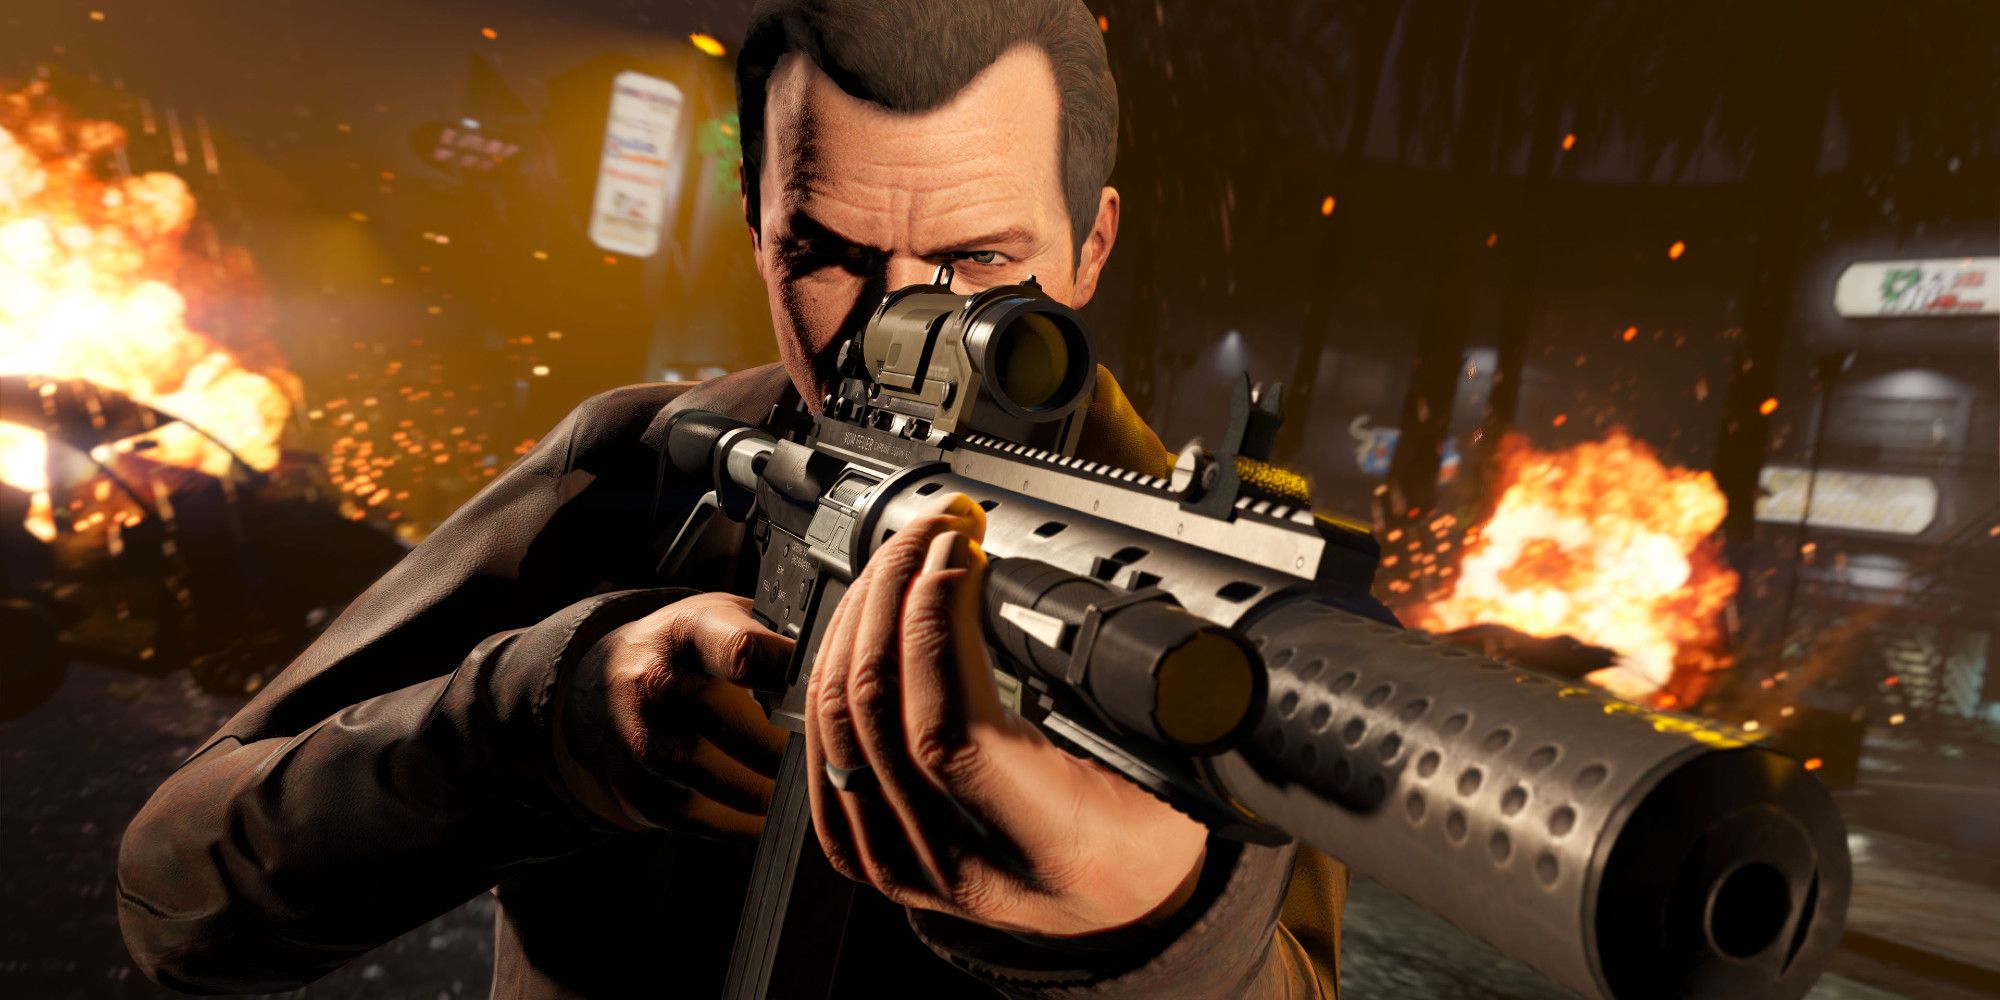 A Grand Theft Auto character holding a large gun, surrounded by explosions